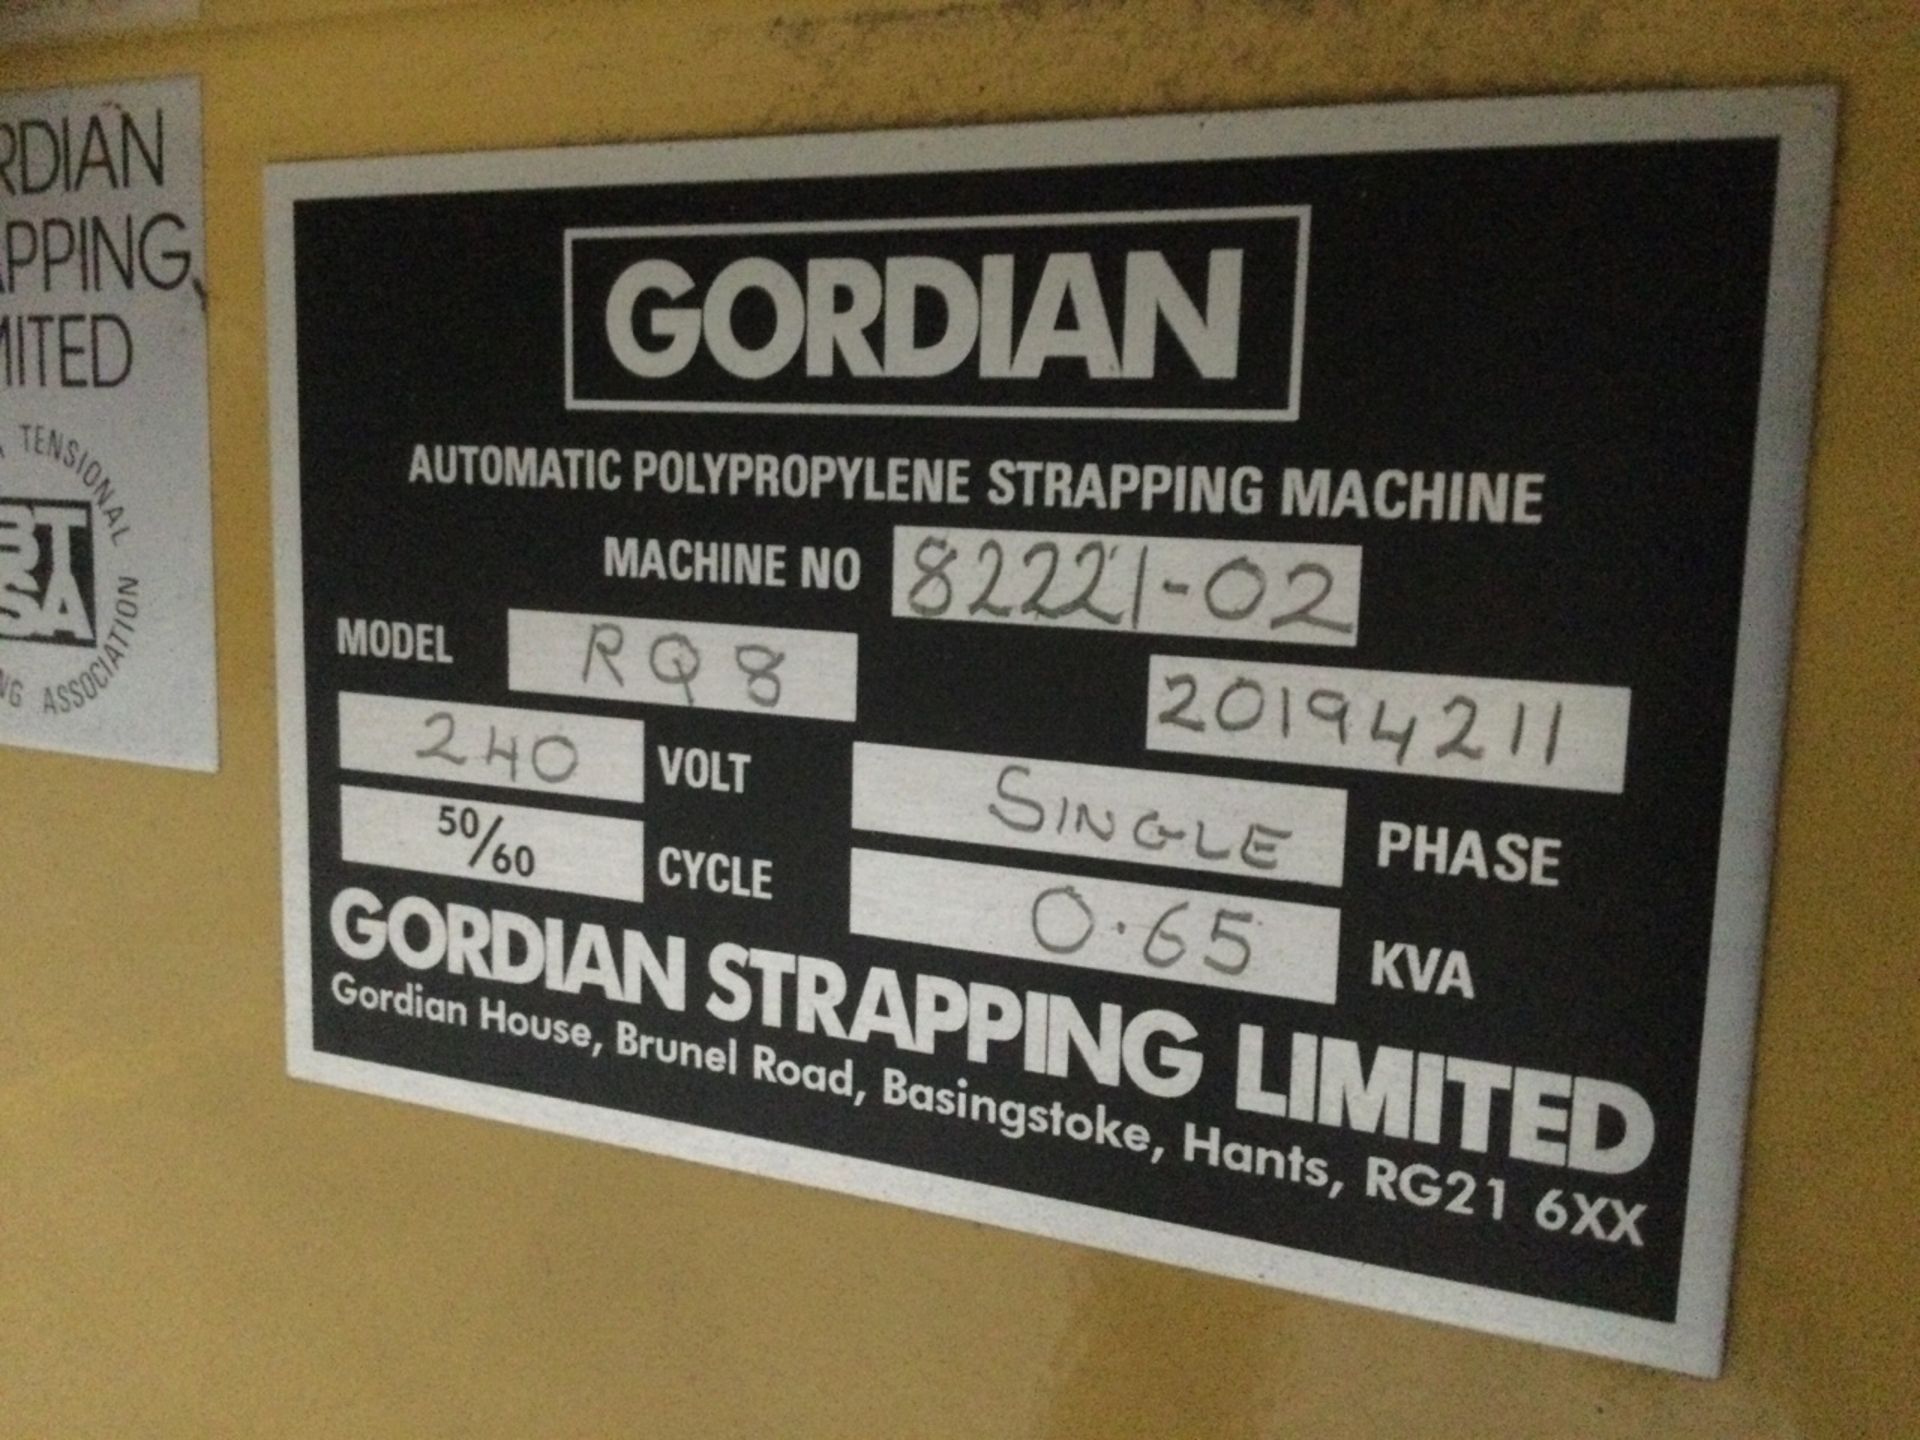 Gordian RQ8 Electronic Strapping Machine serial number 82221-02 - Image 2 of 2